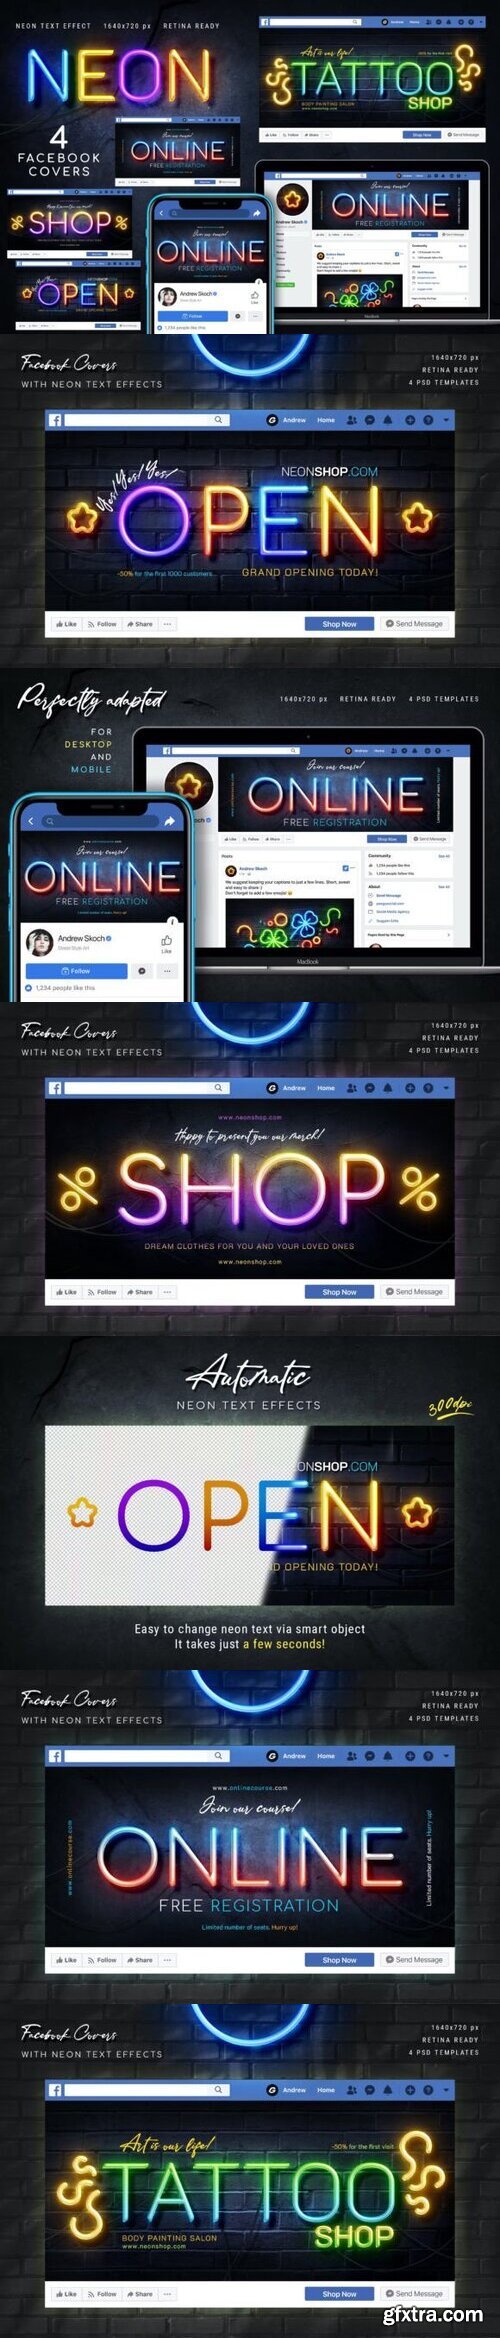 Neon Facebook Covers - 4 PSD